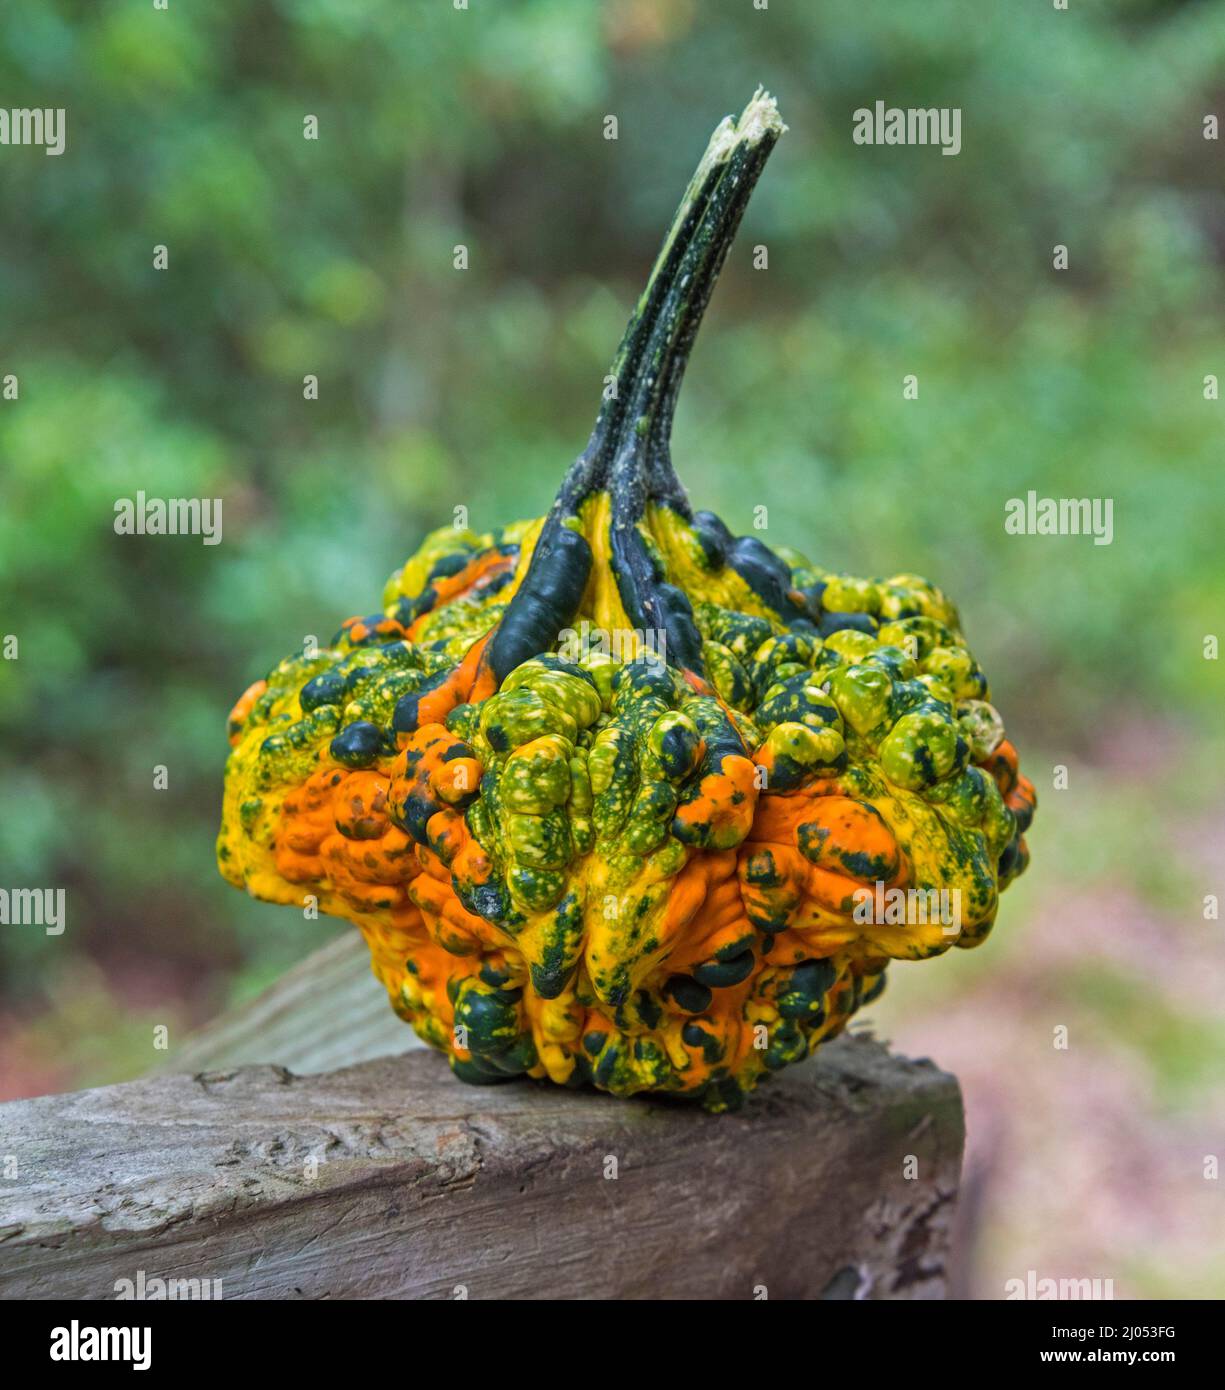 Ornamental and decorative gourds are unusually and beautifully formed members of the gourd family, produced.during the fall and autumn growing season. Stock Photo